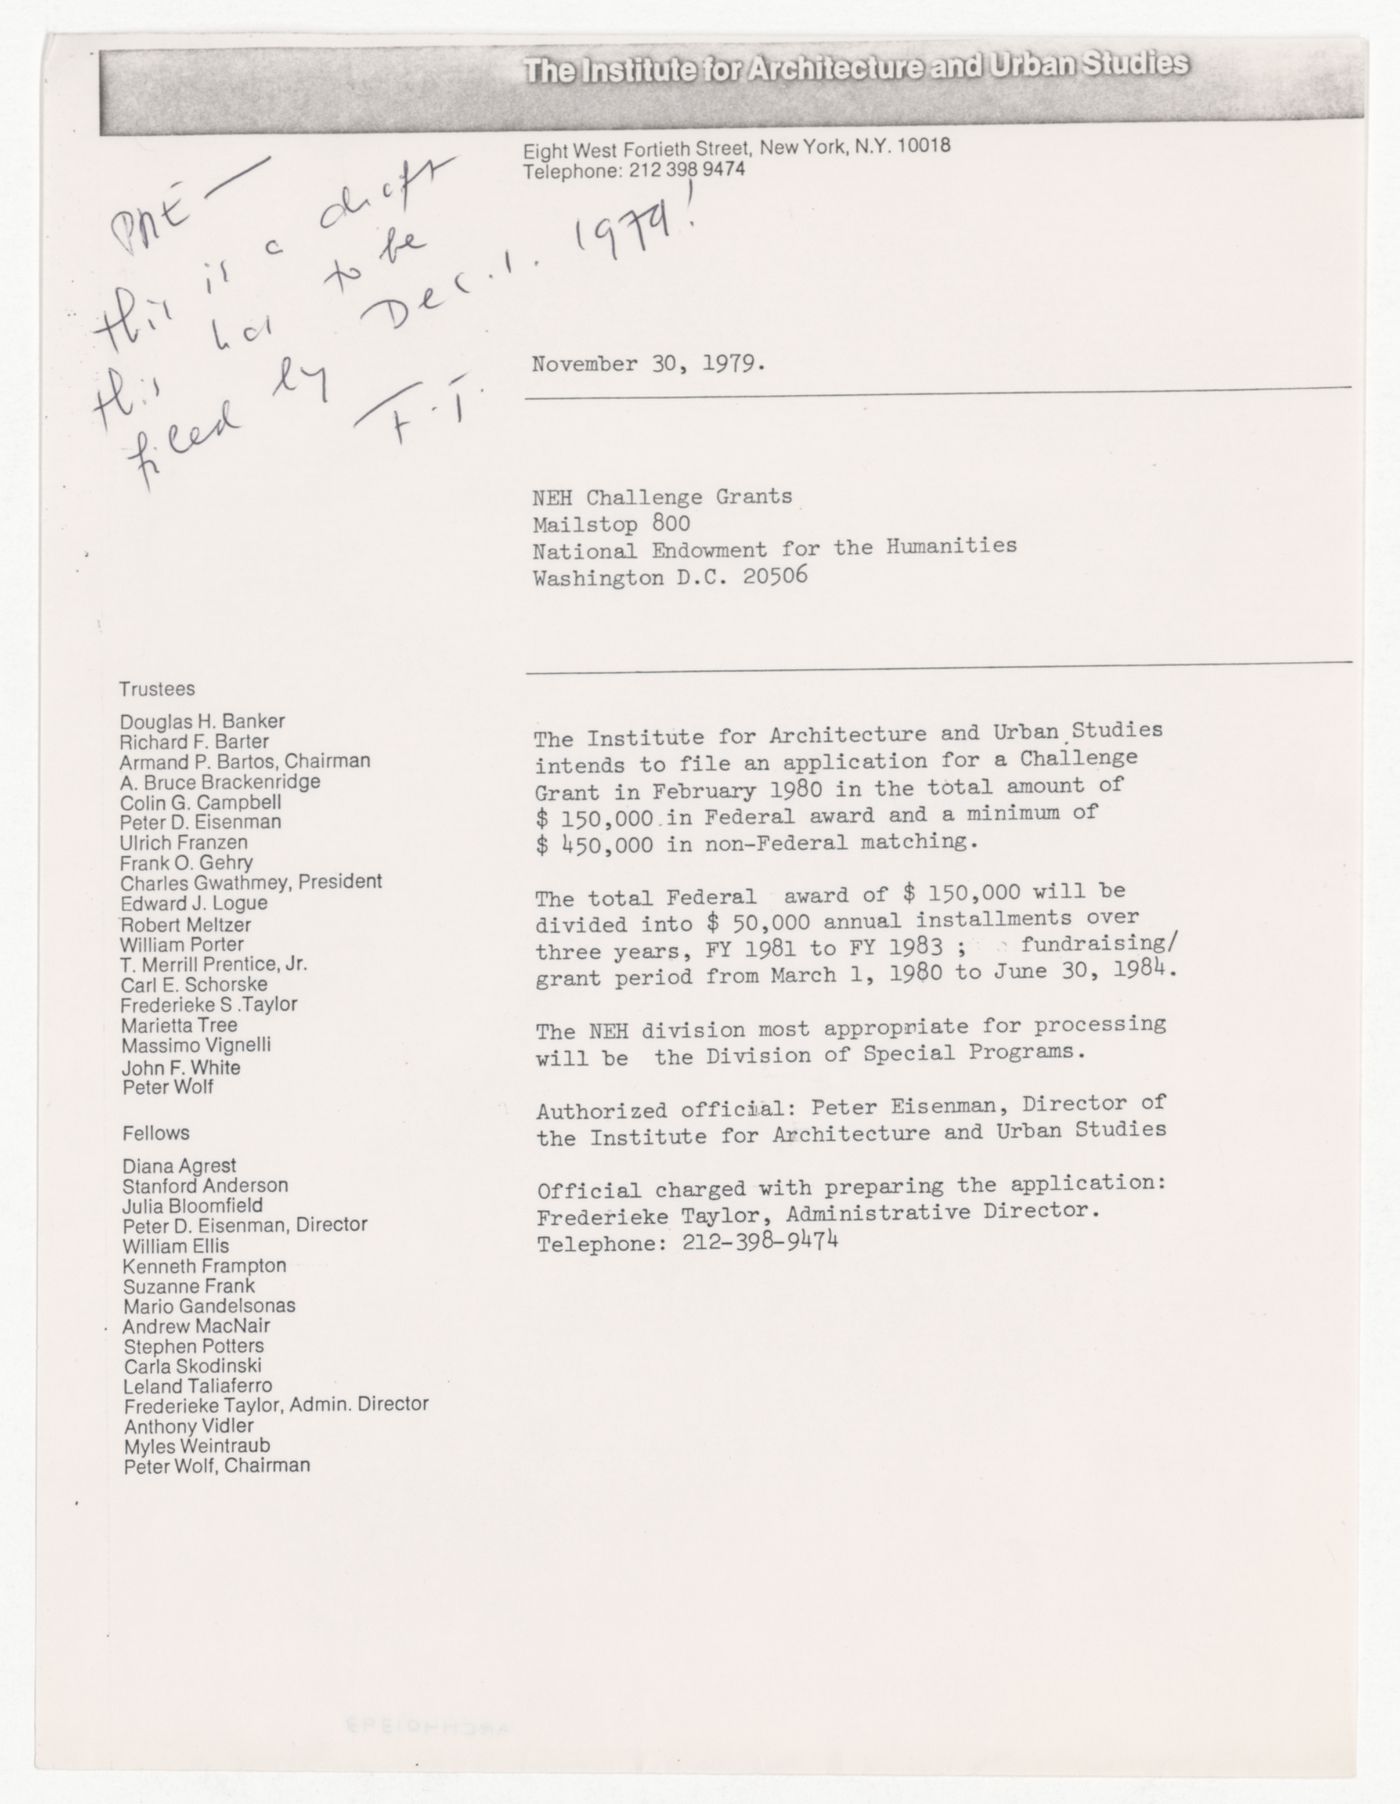 Draft letter from IAUS to National Endowment for the Humanities (NEH) about NEH Challenge Grants with annotations